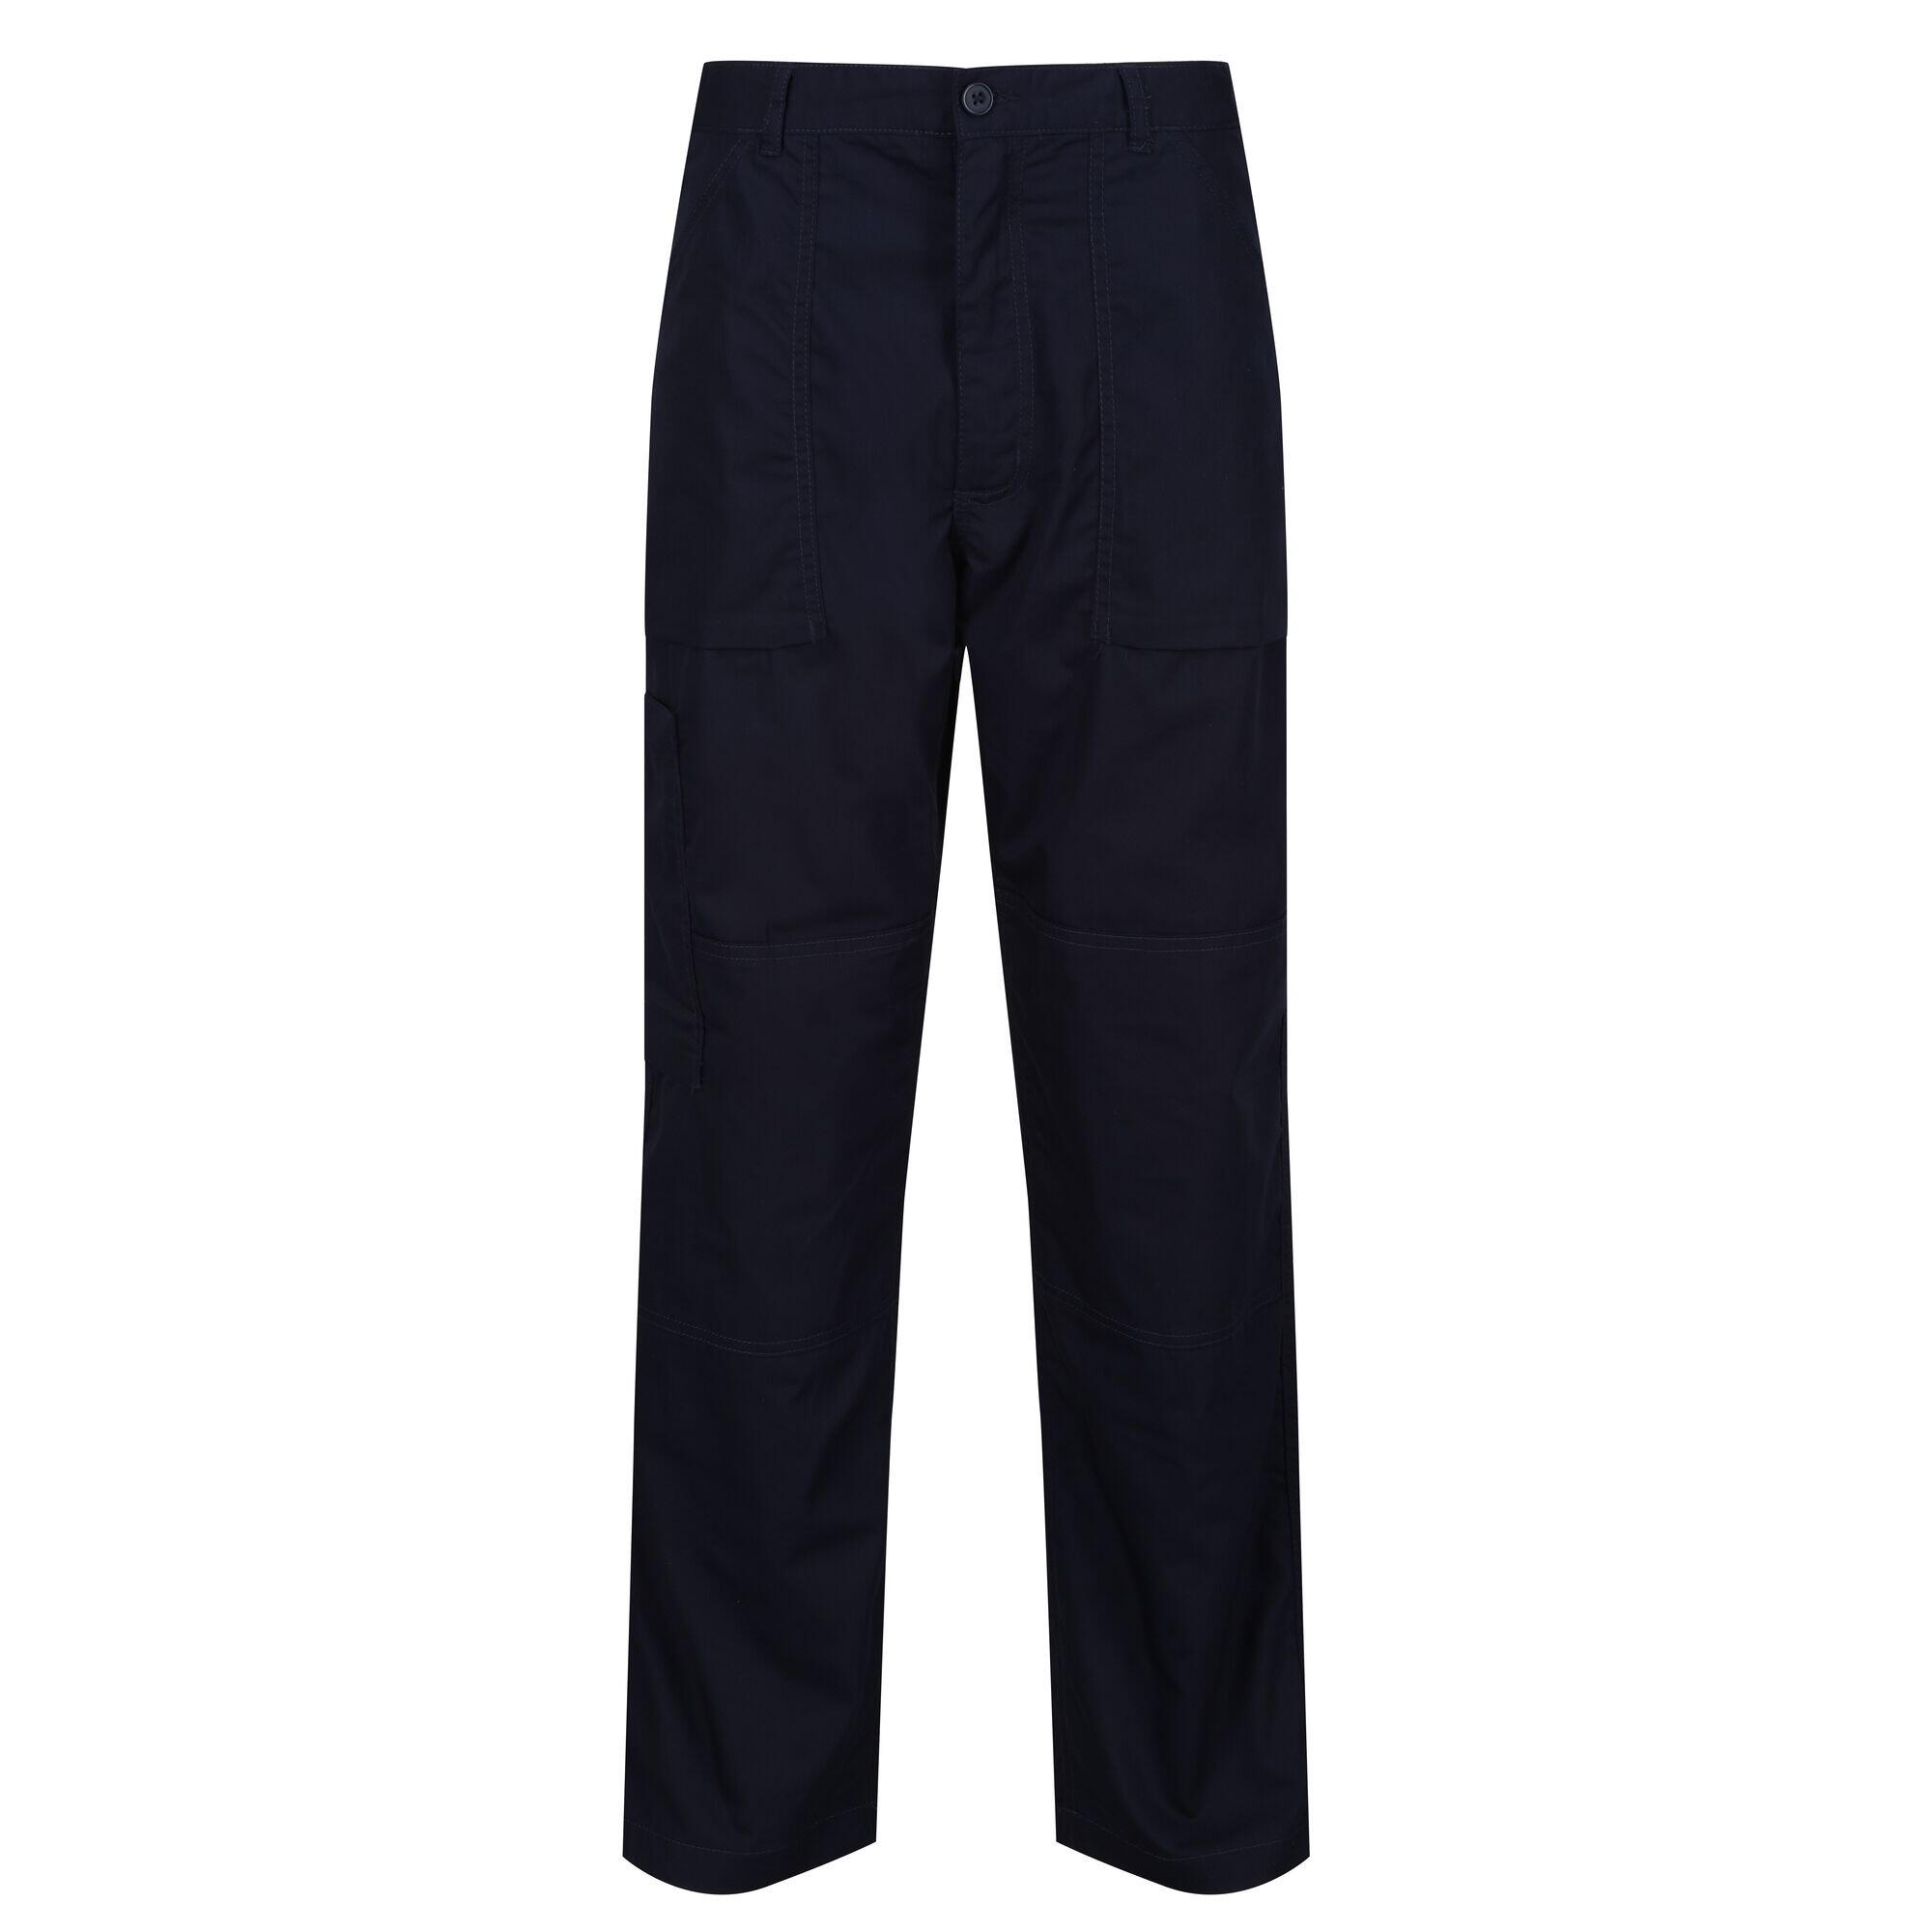 REGATTA Mens Sports New Lined Action Trousers (Navy)